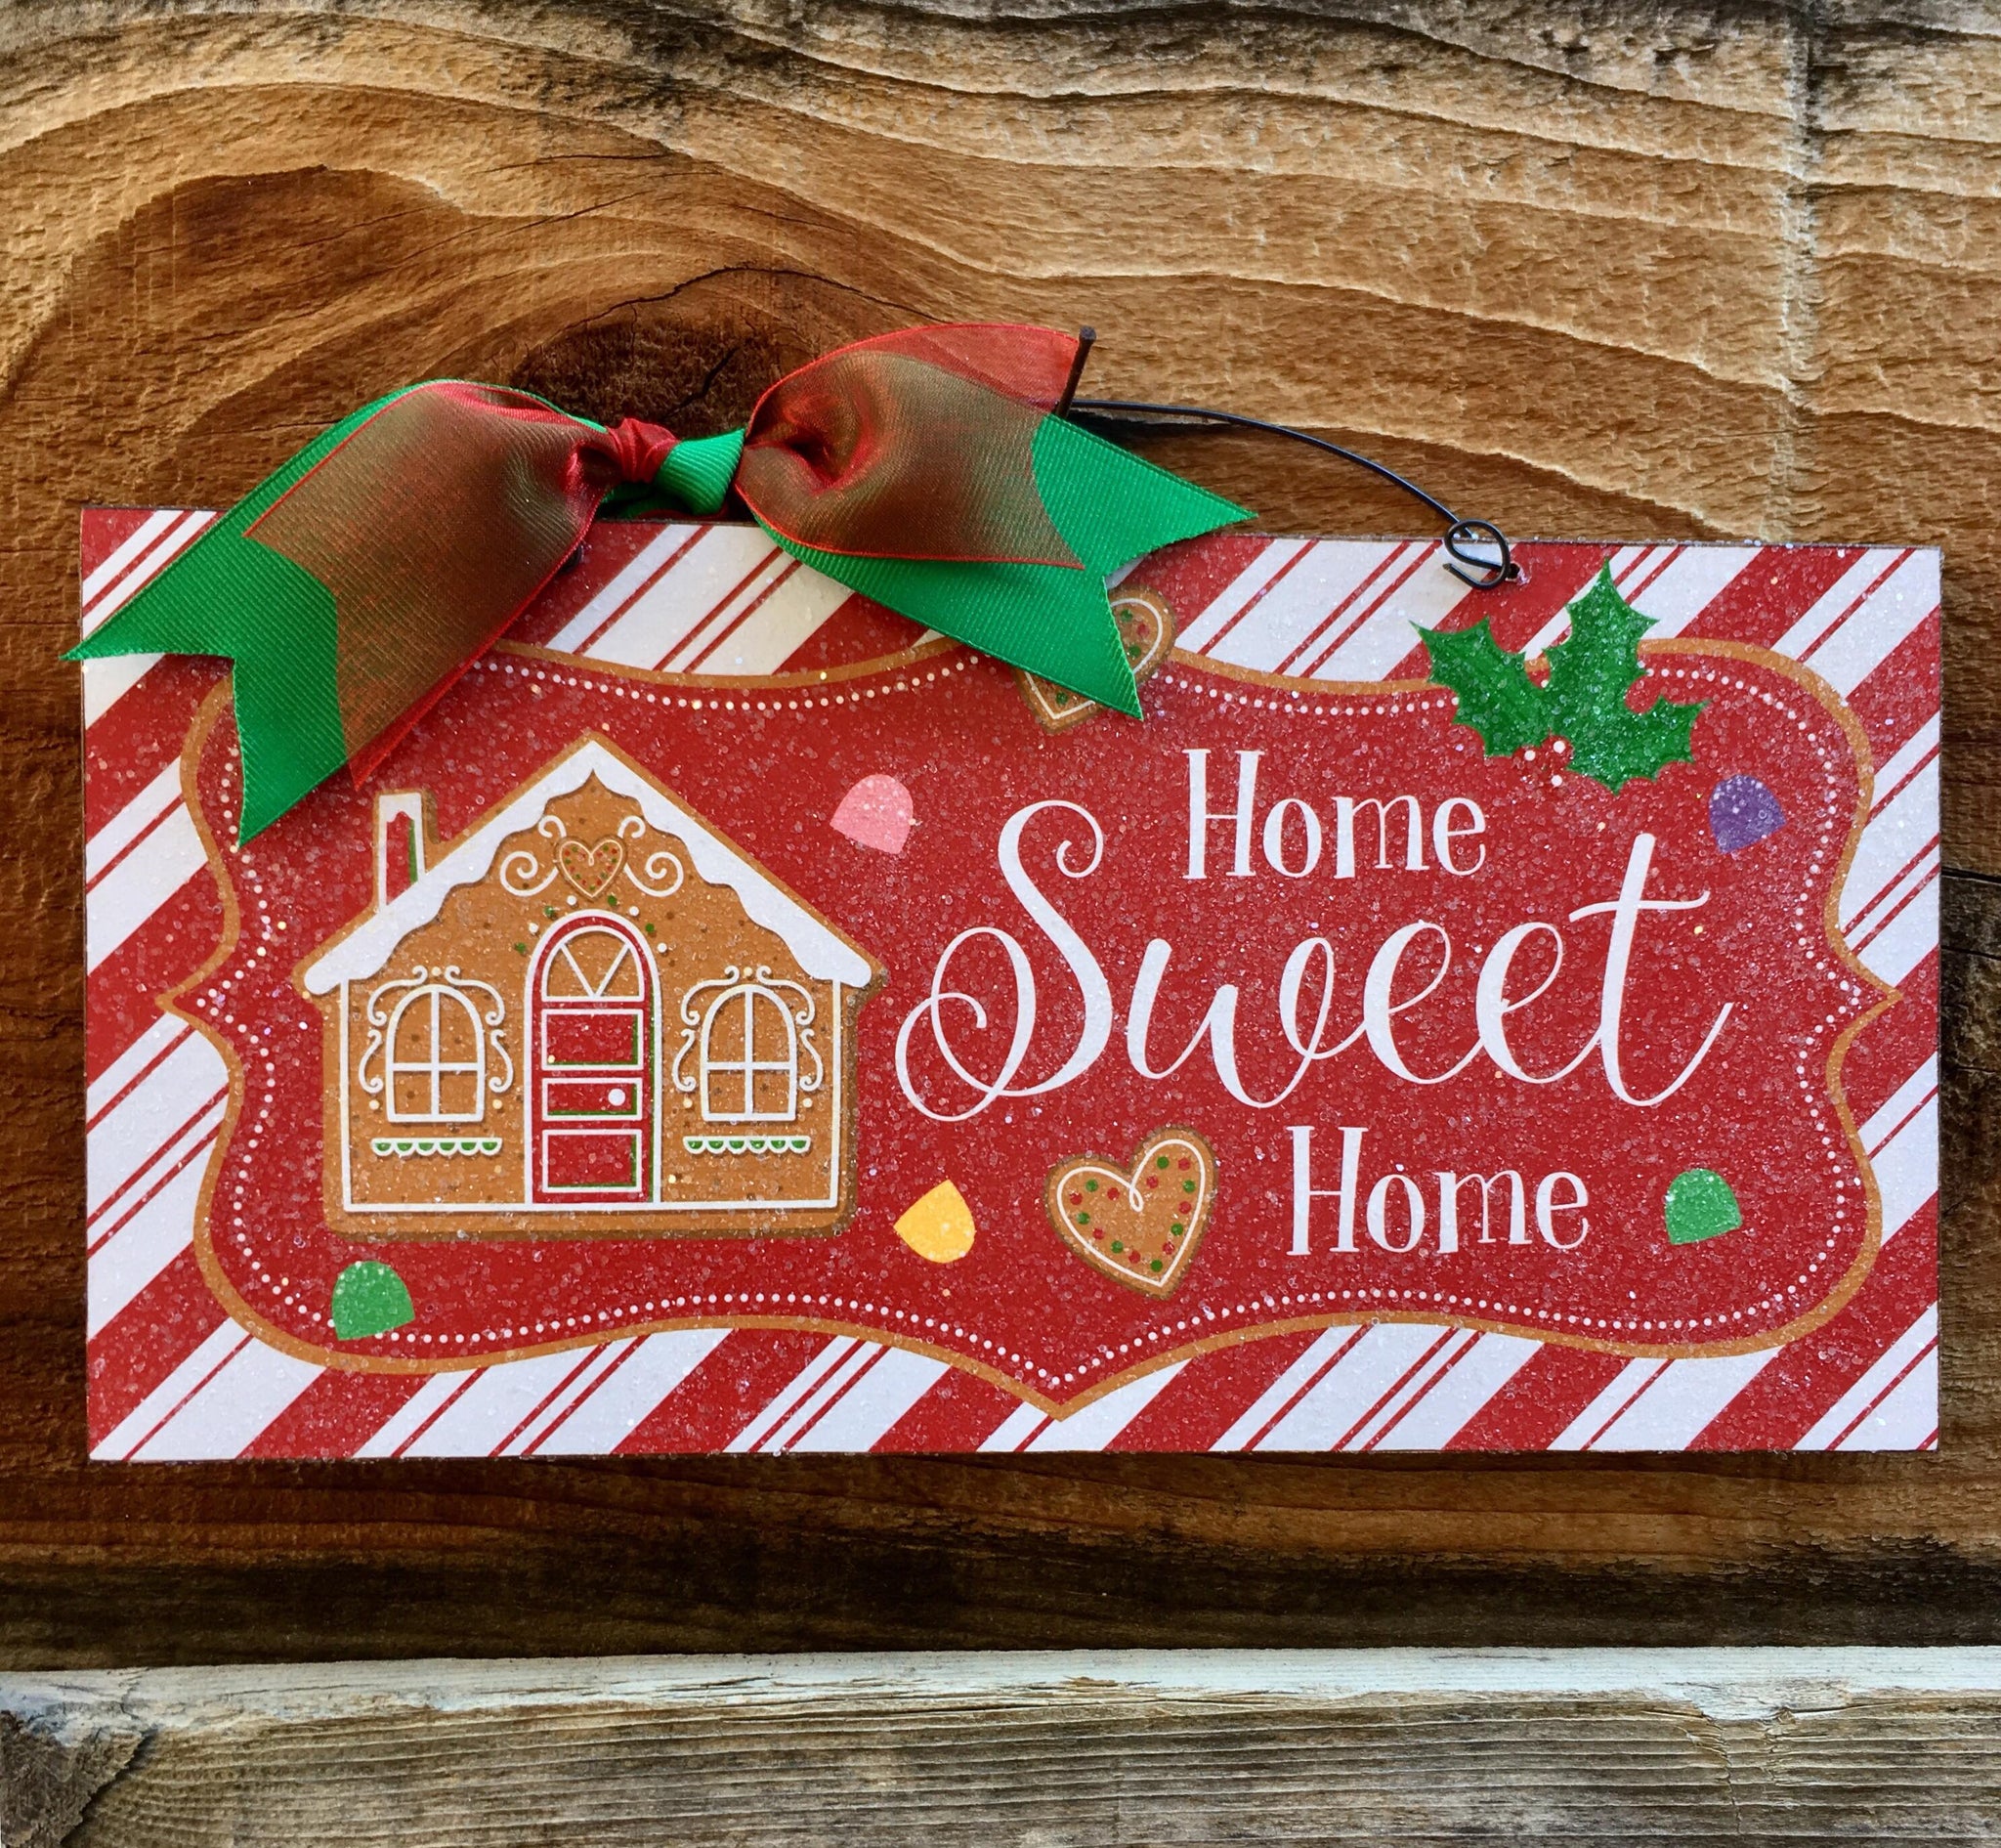 Home Sweet Home Gingerbread House sign.